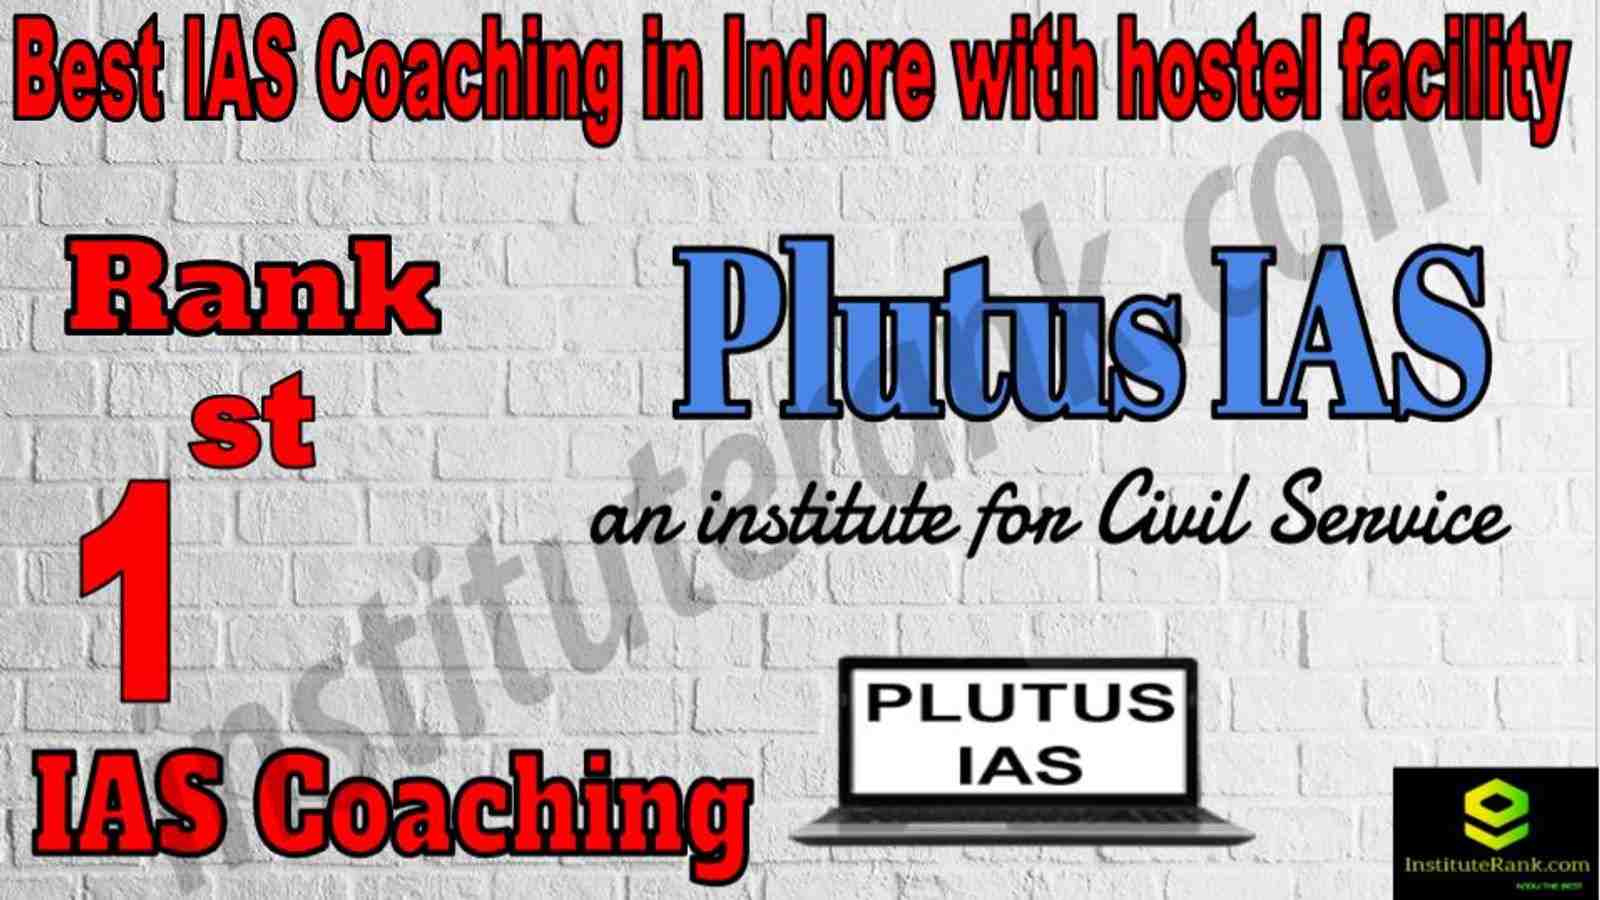 1st Best IAS Coaching in Indore with hostel Facility